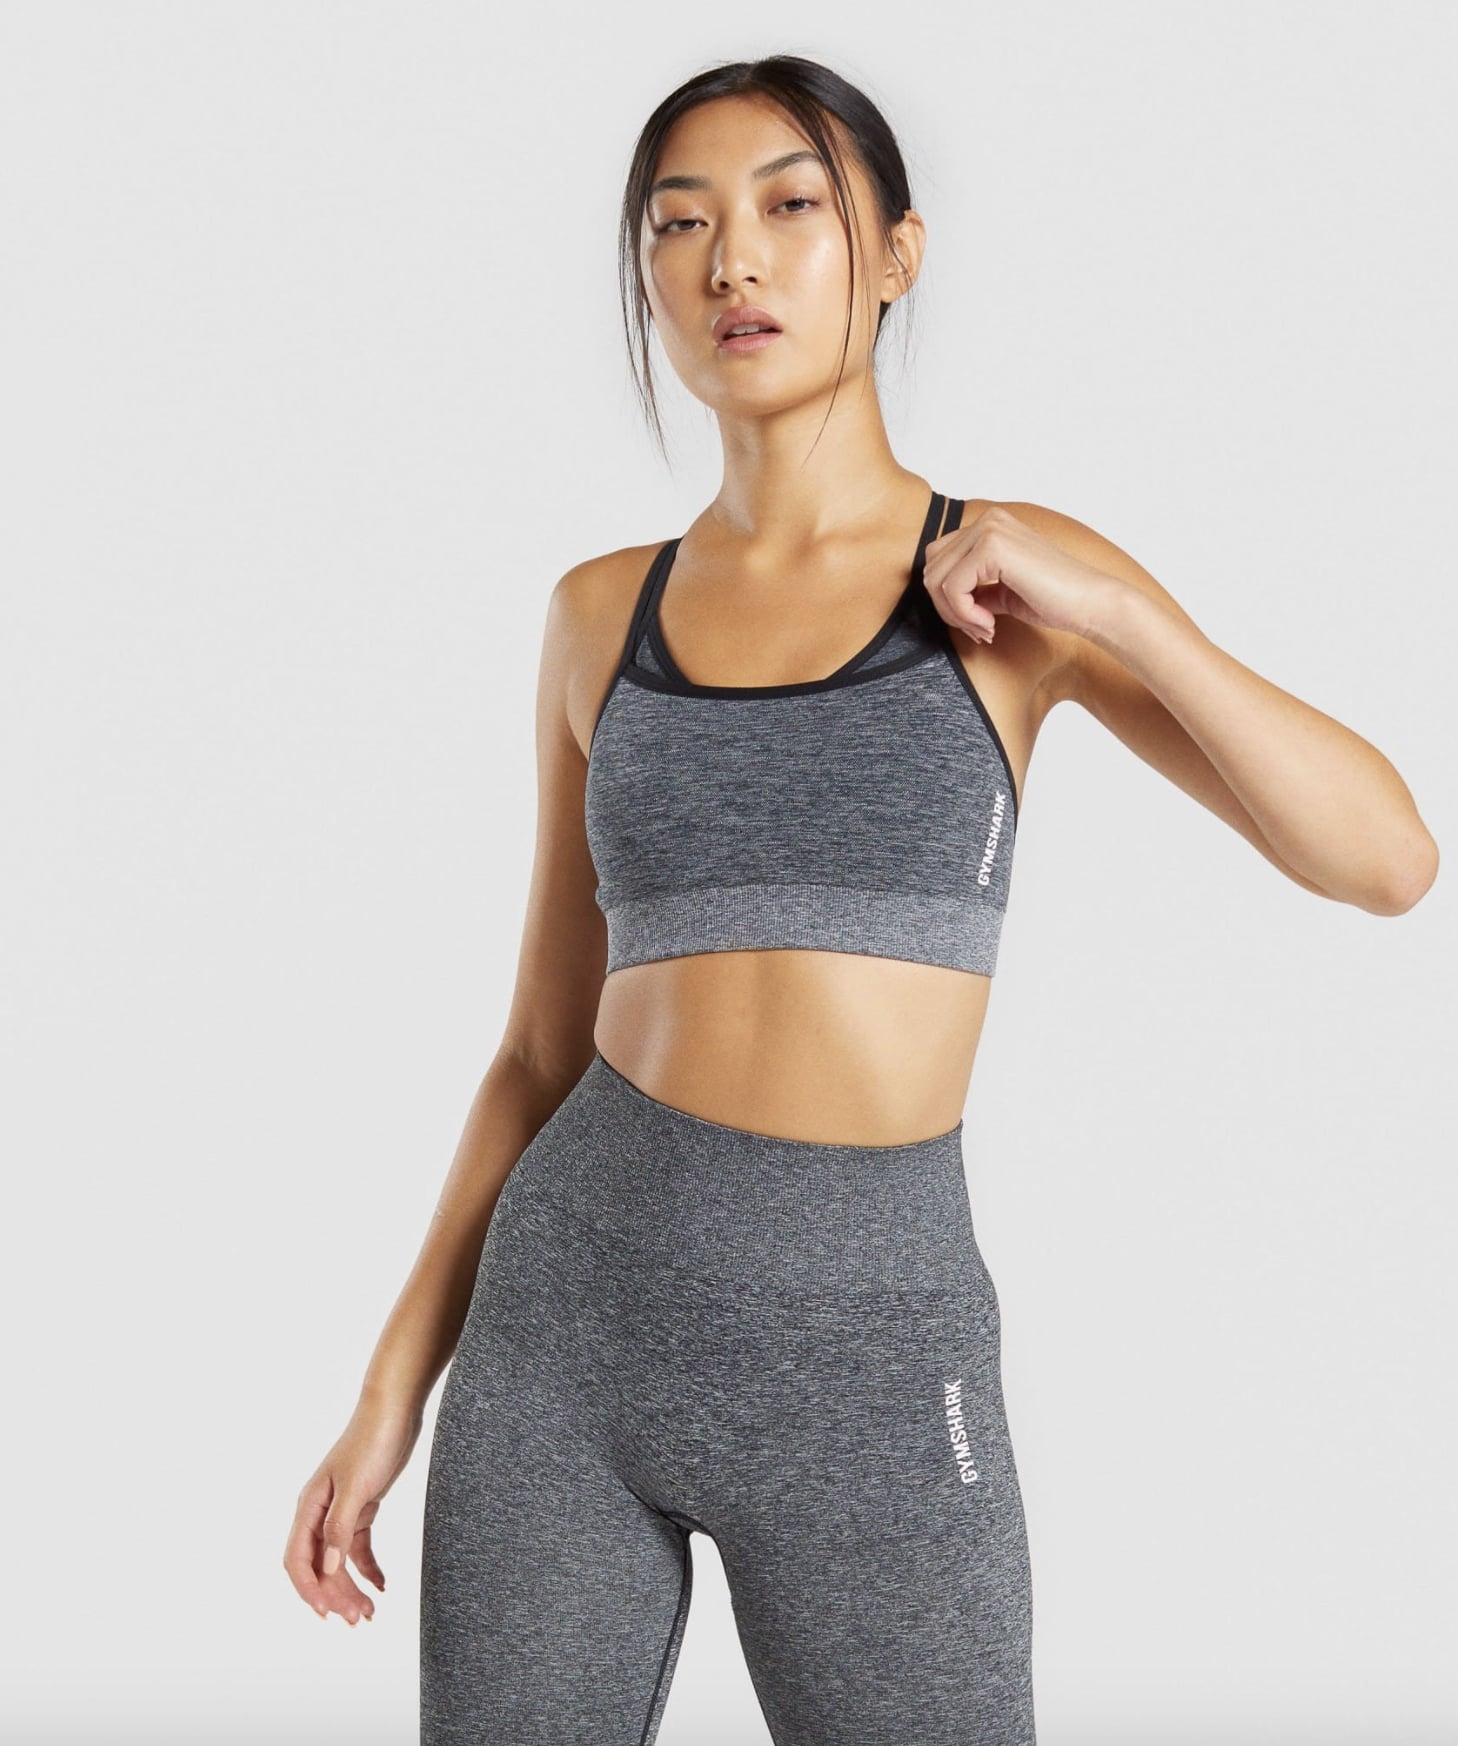 Shop Gymshark's Early Black Friday Sale Now